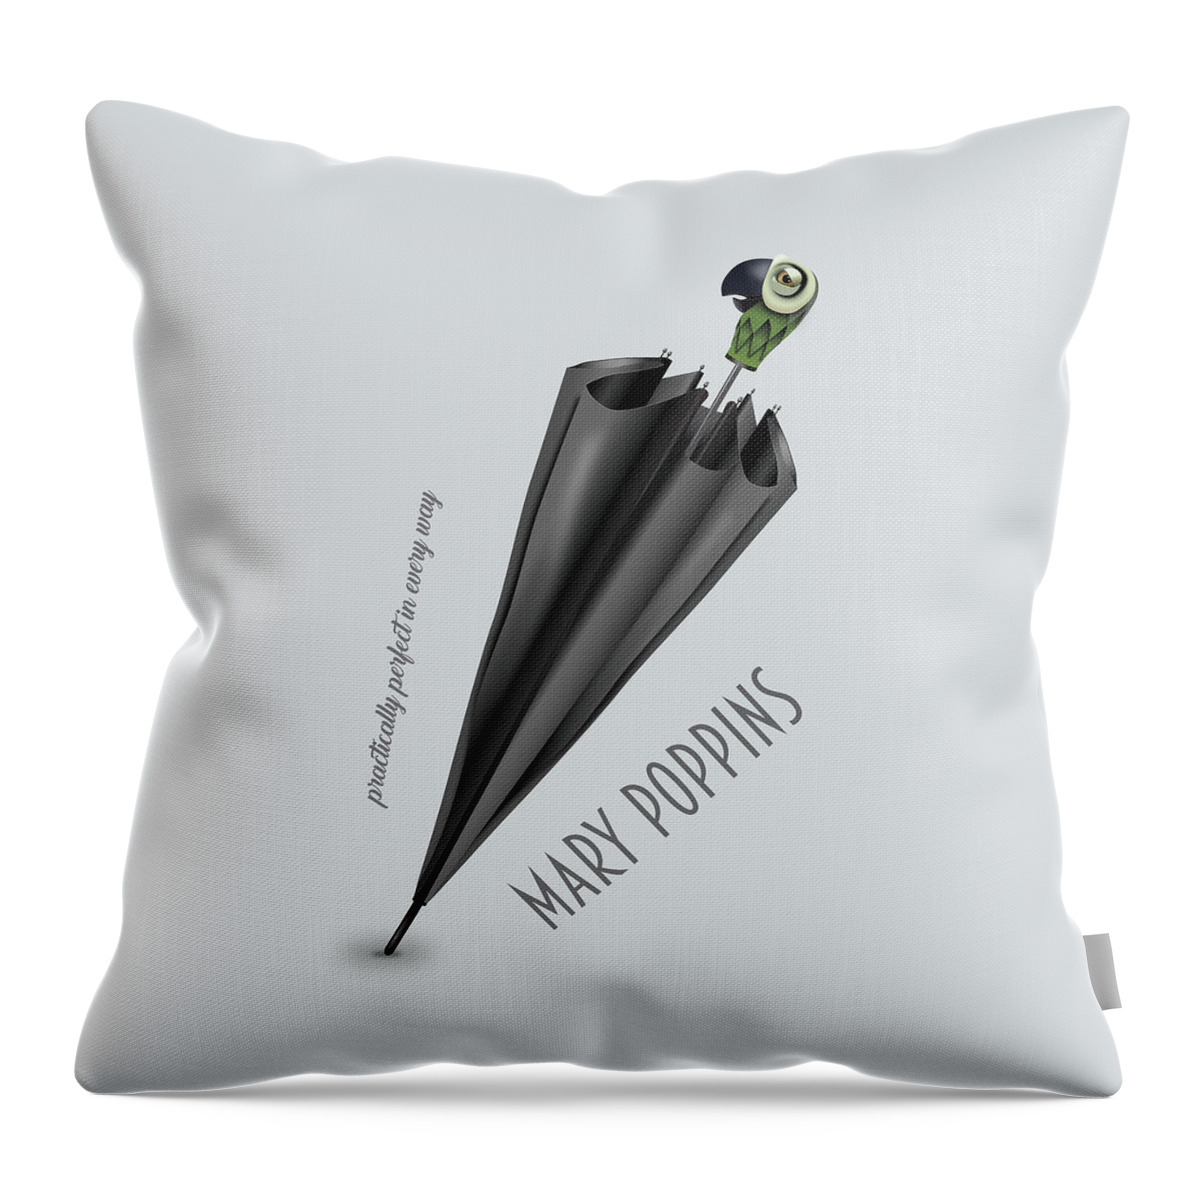 Mary Poppins Throw Pillow featuring the digital art Mary Poppins - Alternative Movie Poster by Movie Poster Boy